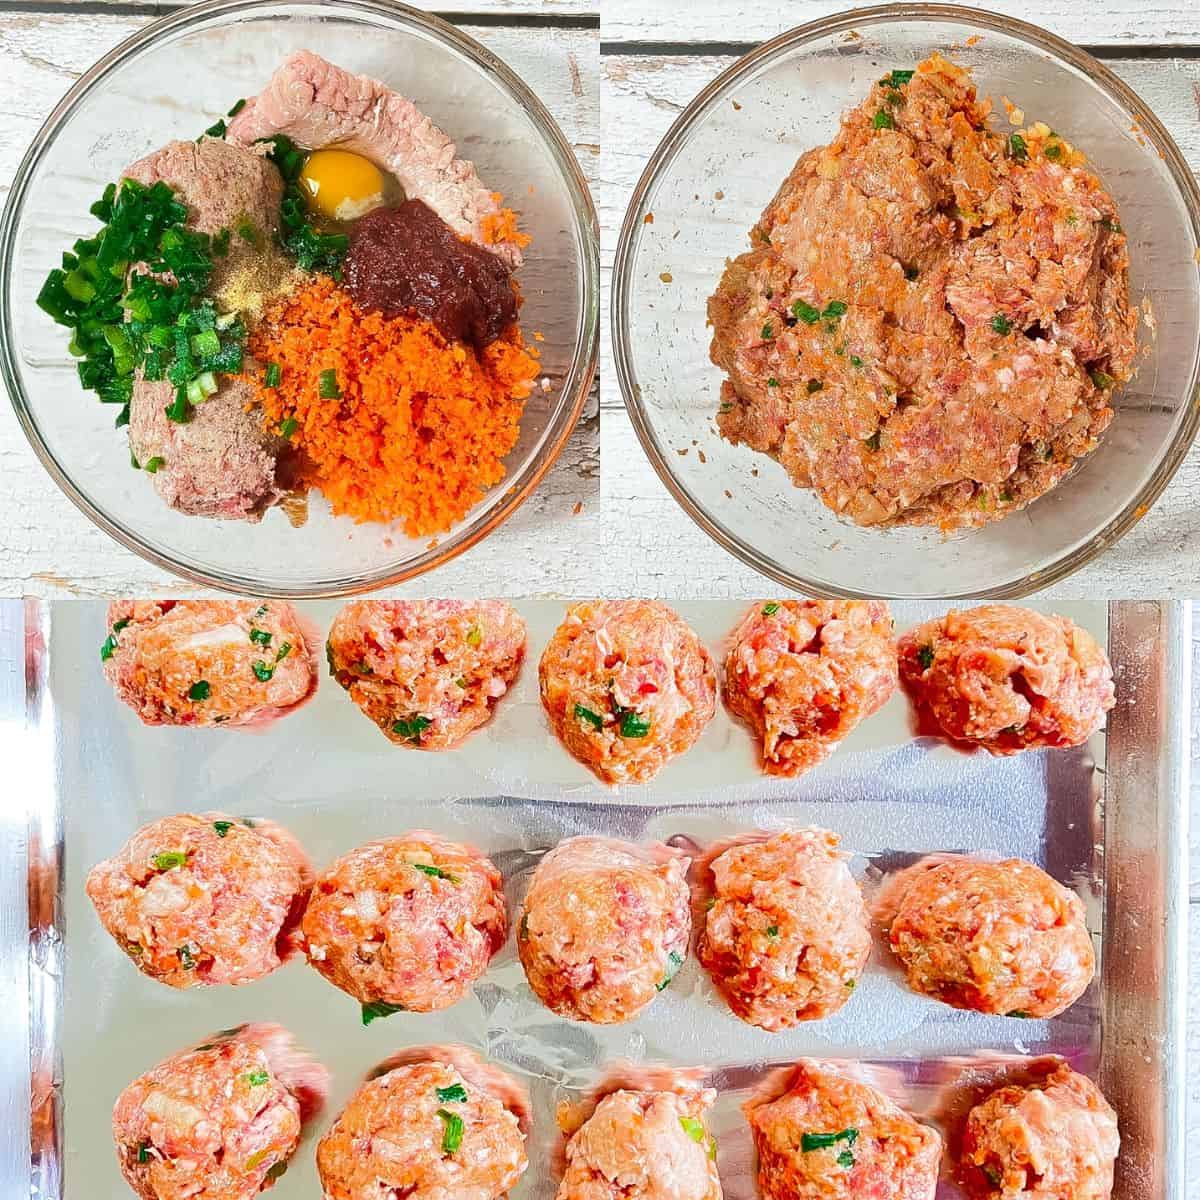 Step by step photo on how to make baed meatballs.